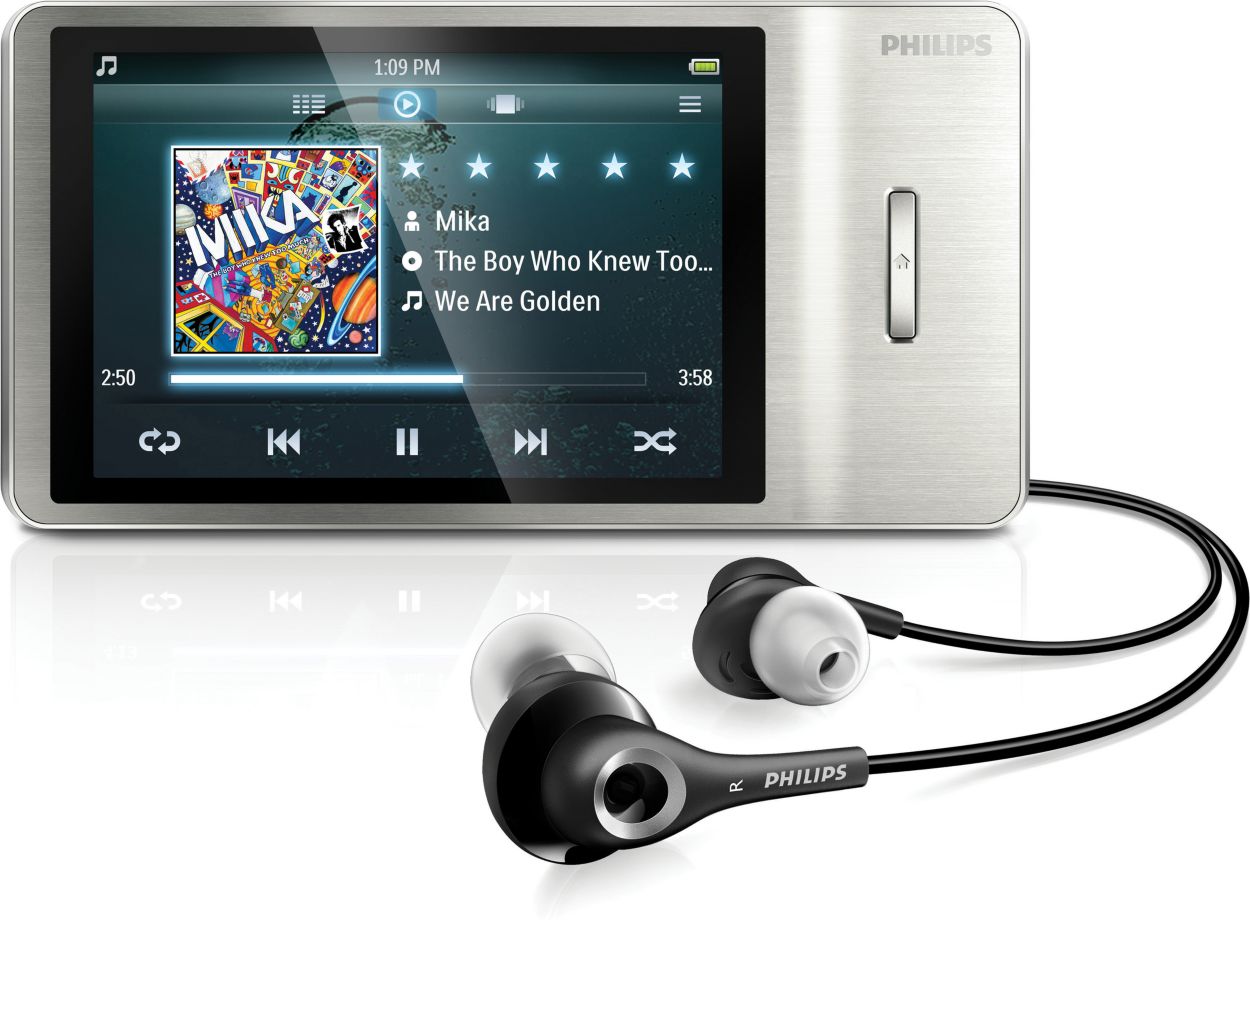 MP4 Player online 